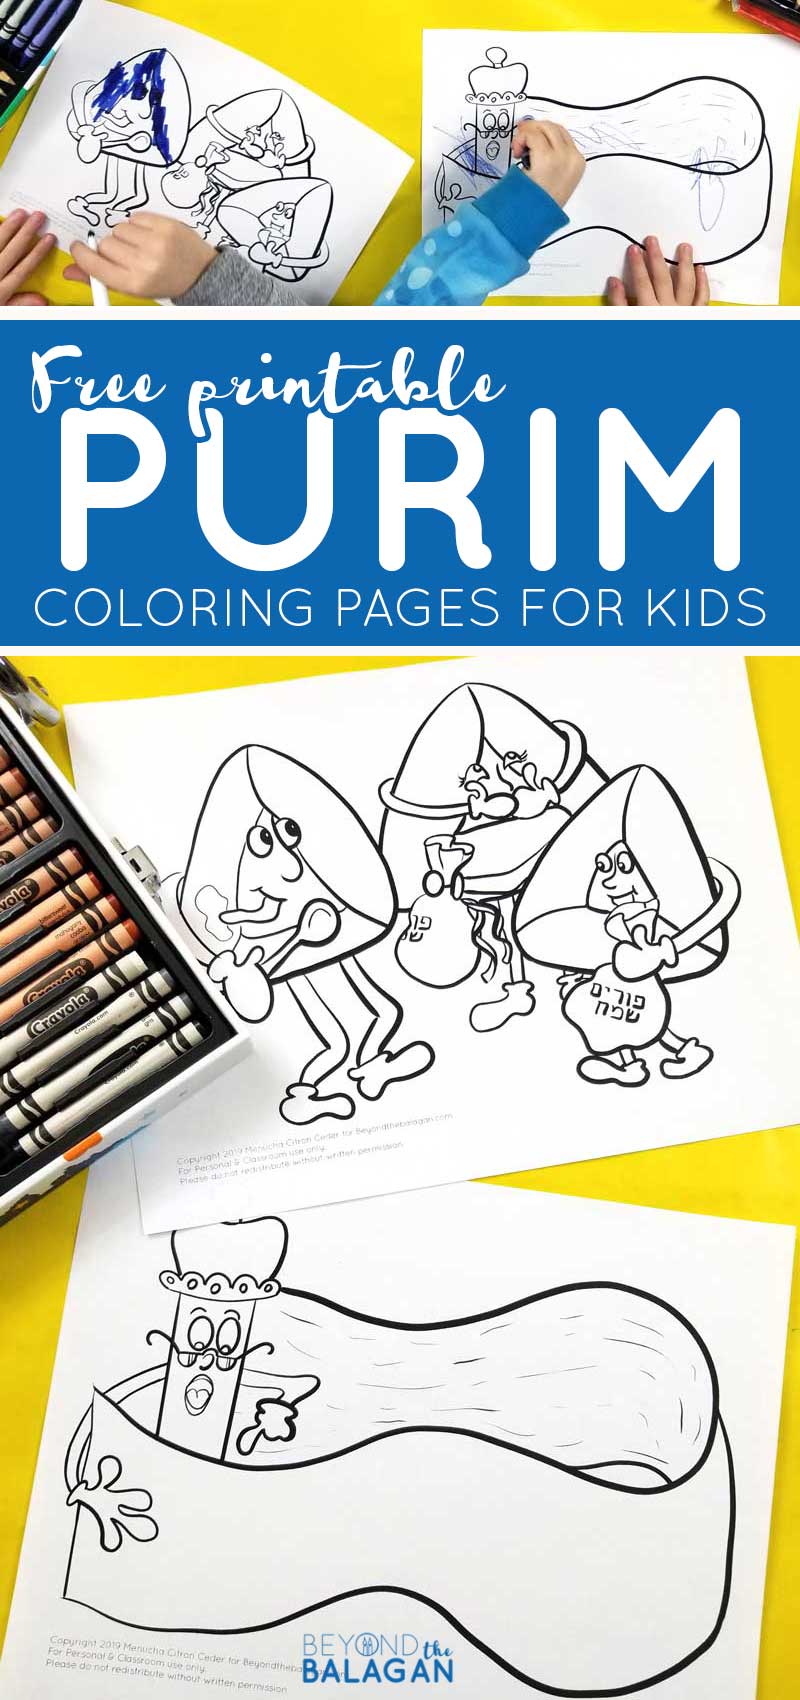 Purim coloring pages for kids